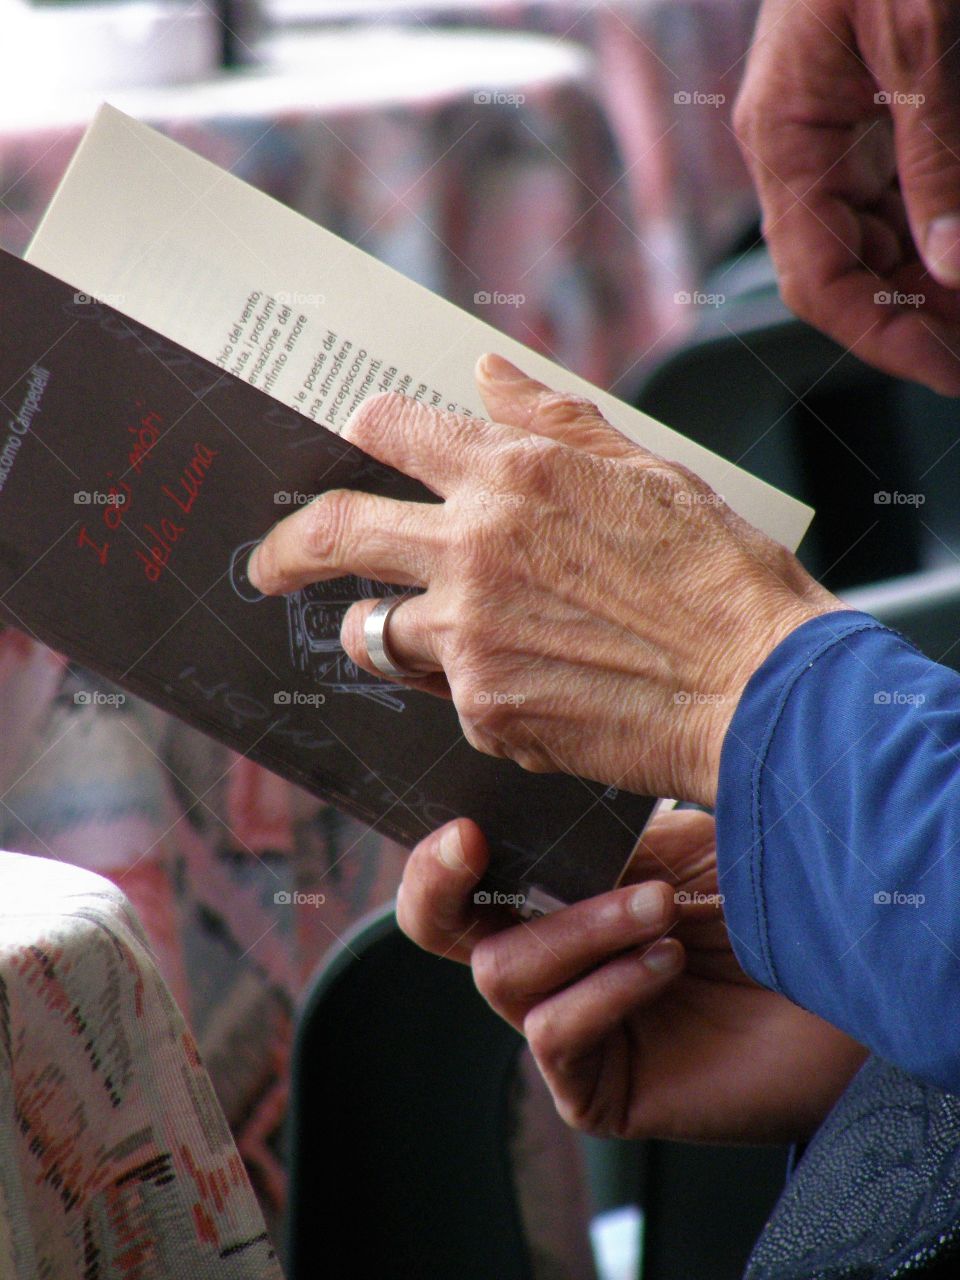 Woman hands holding a book